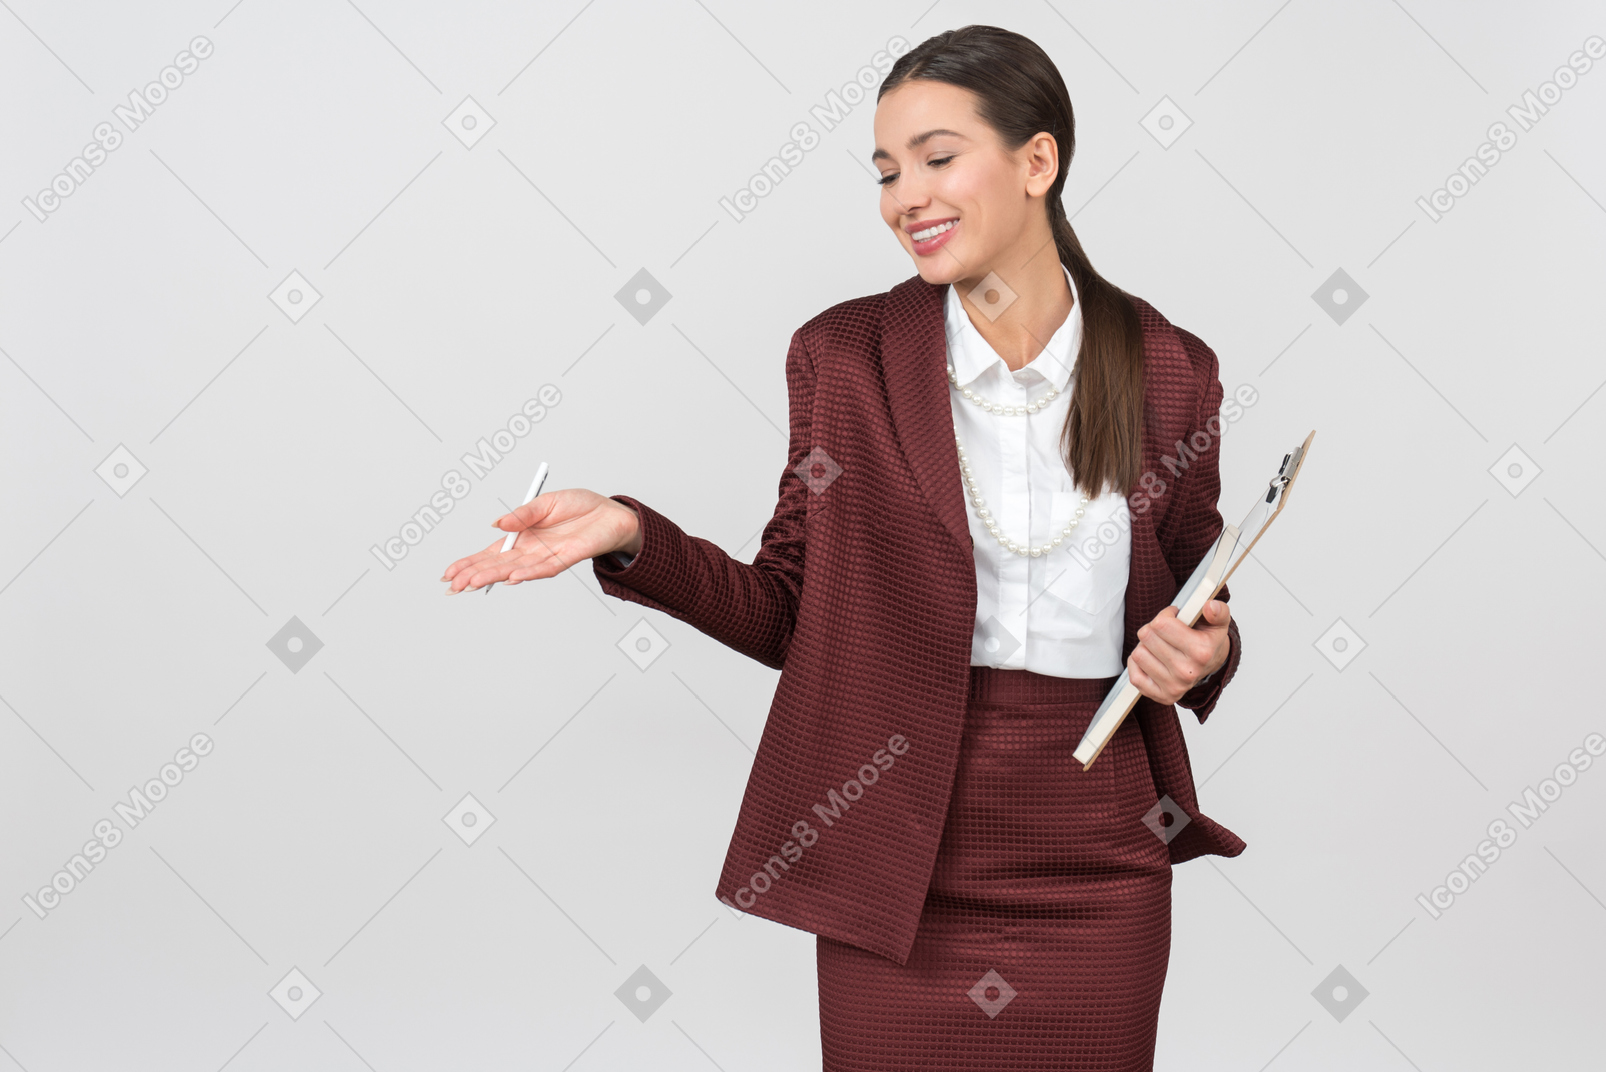 Attractive formally dressed woman looking pleased